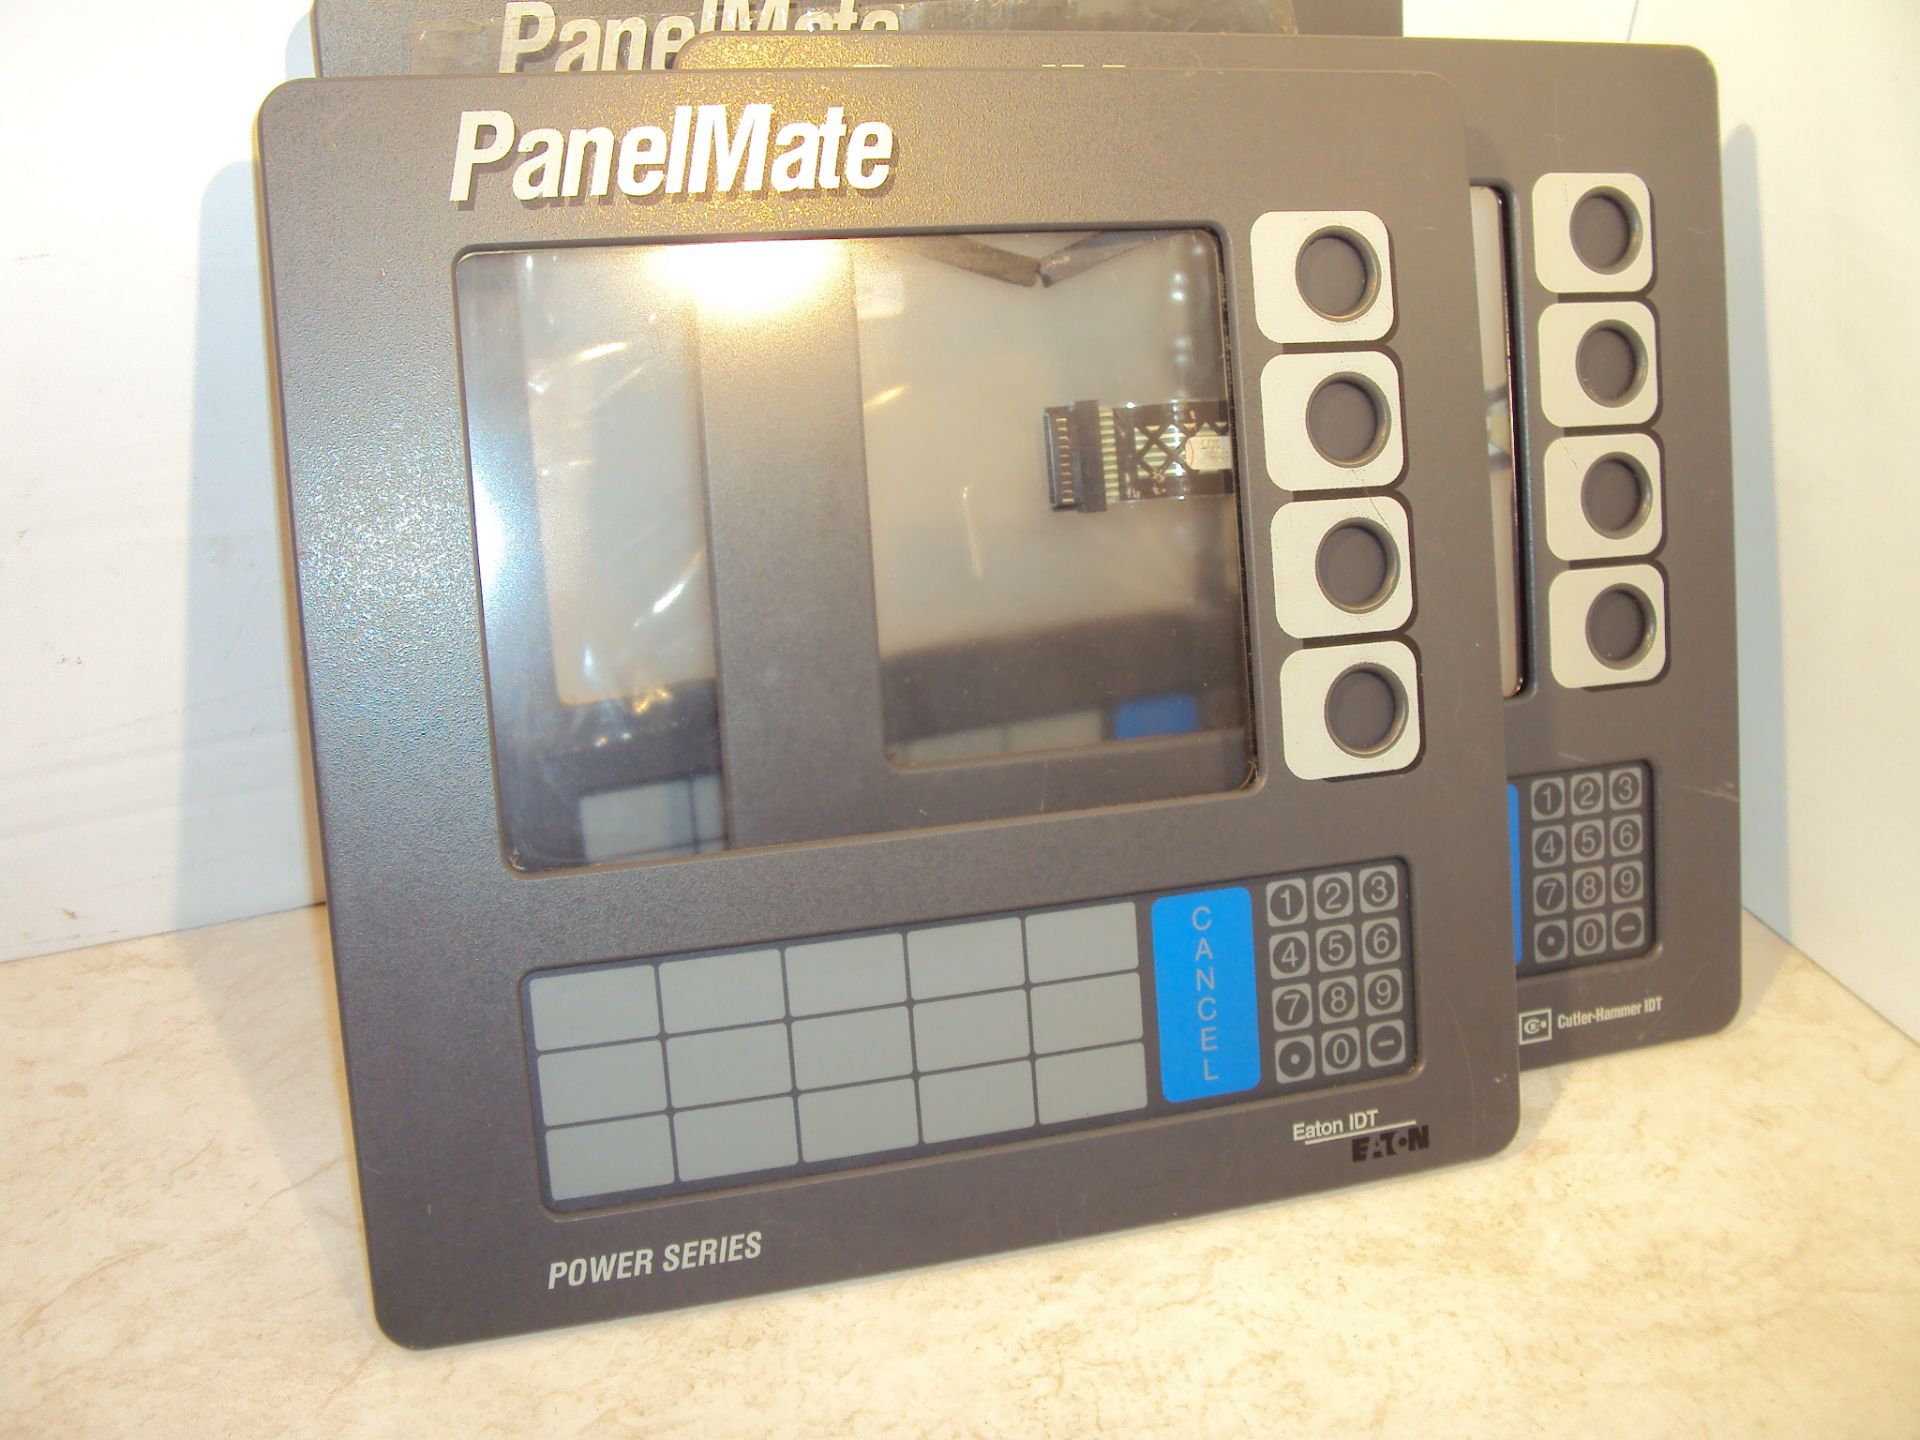 PANELMATE CONTROL PANEL COVERS - Image 4 of 5